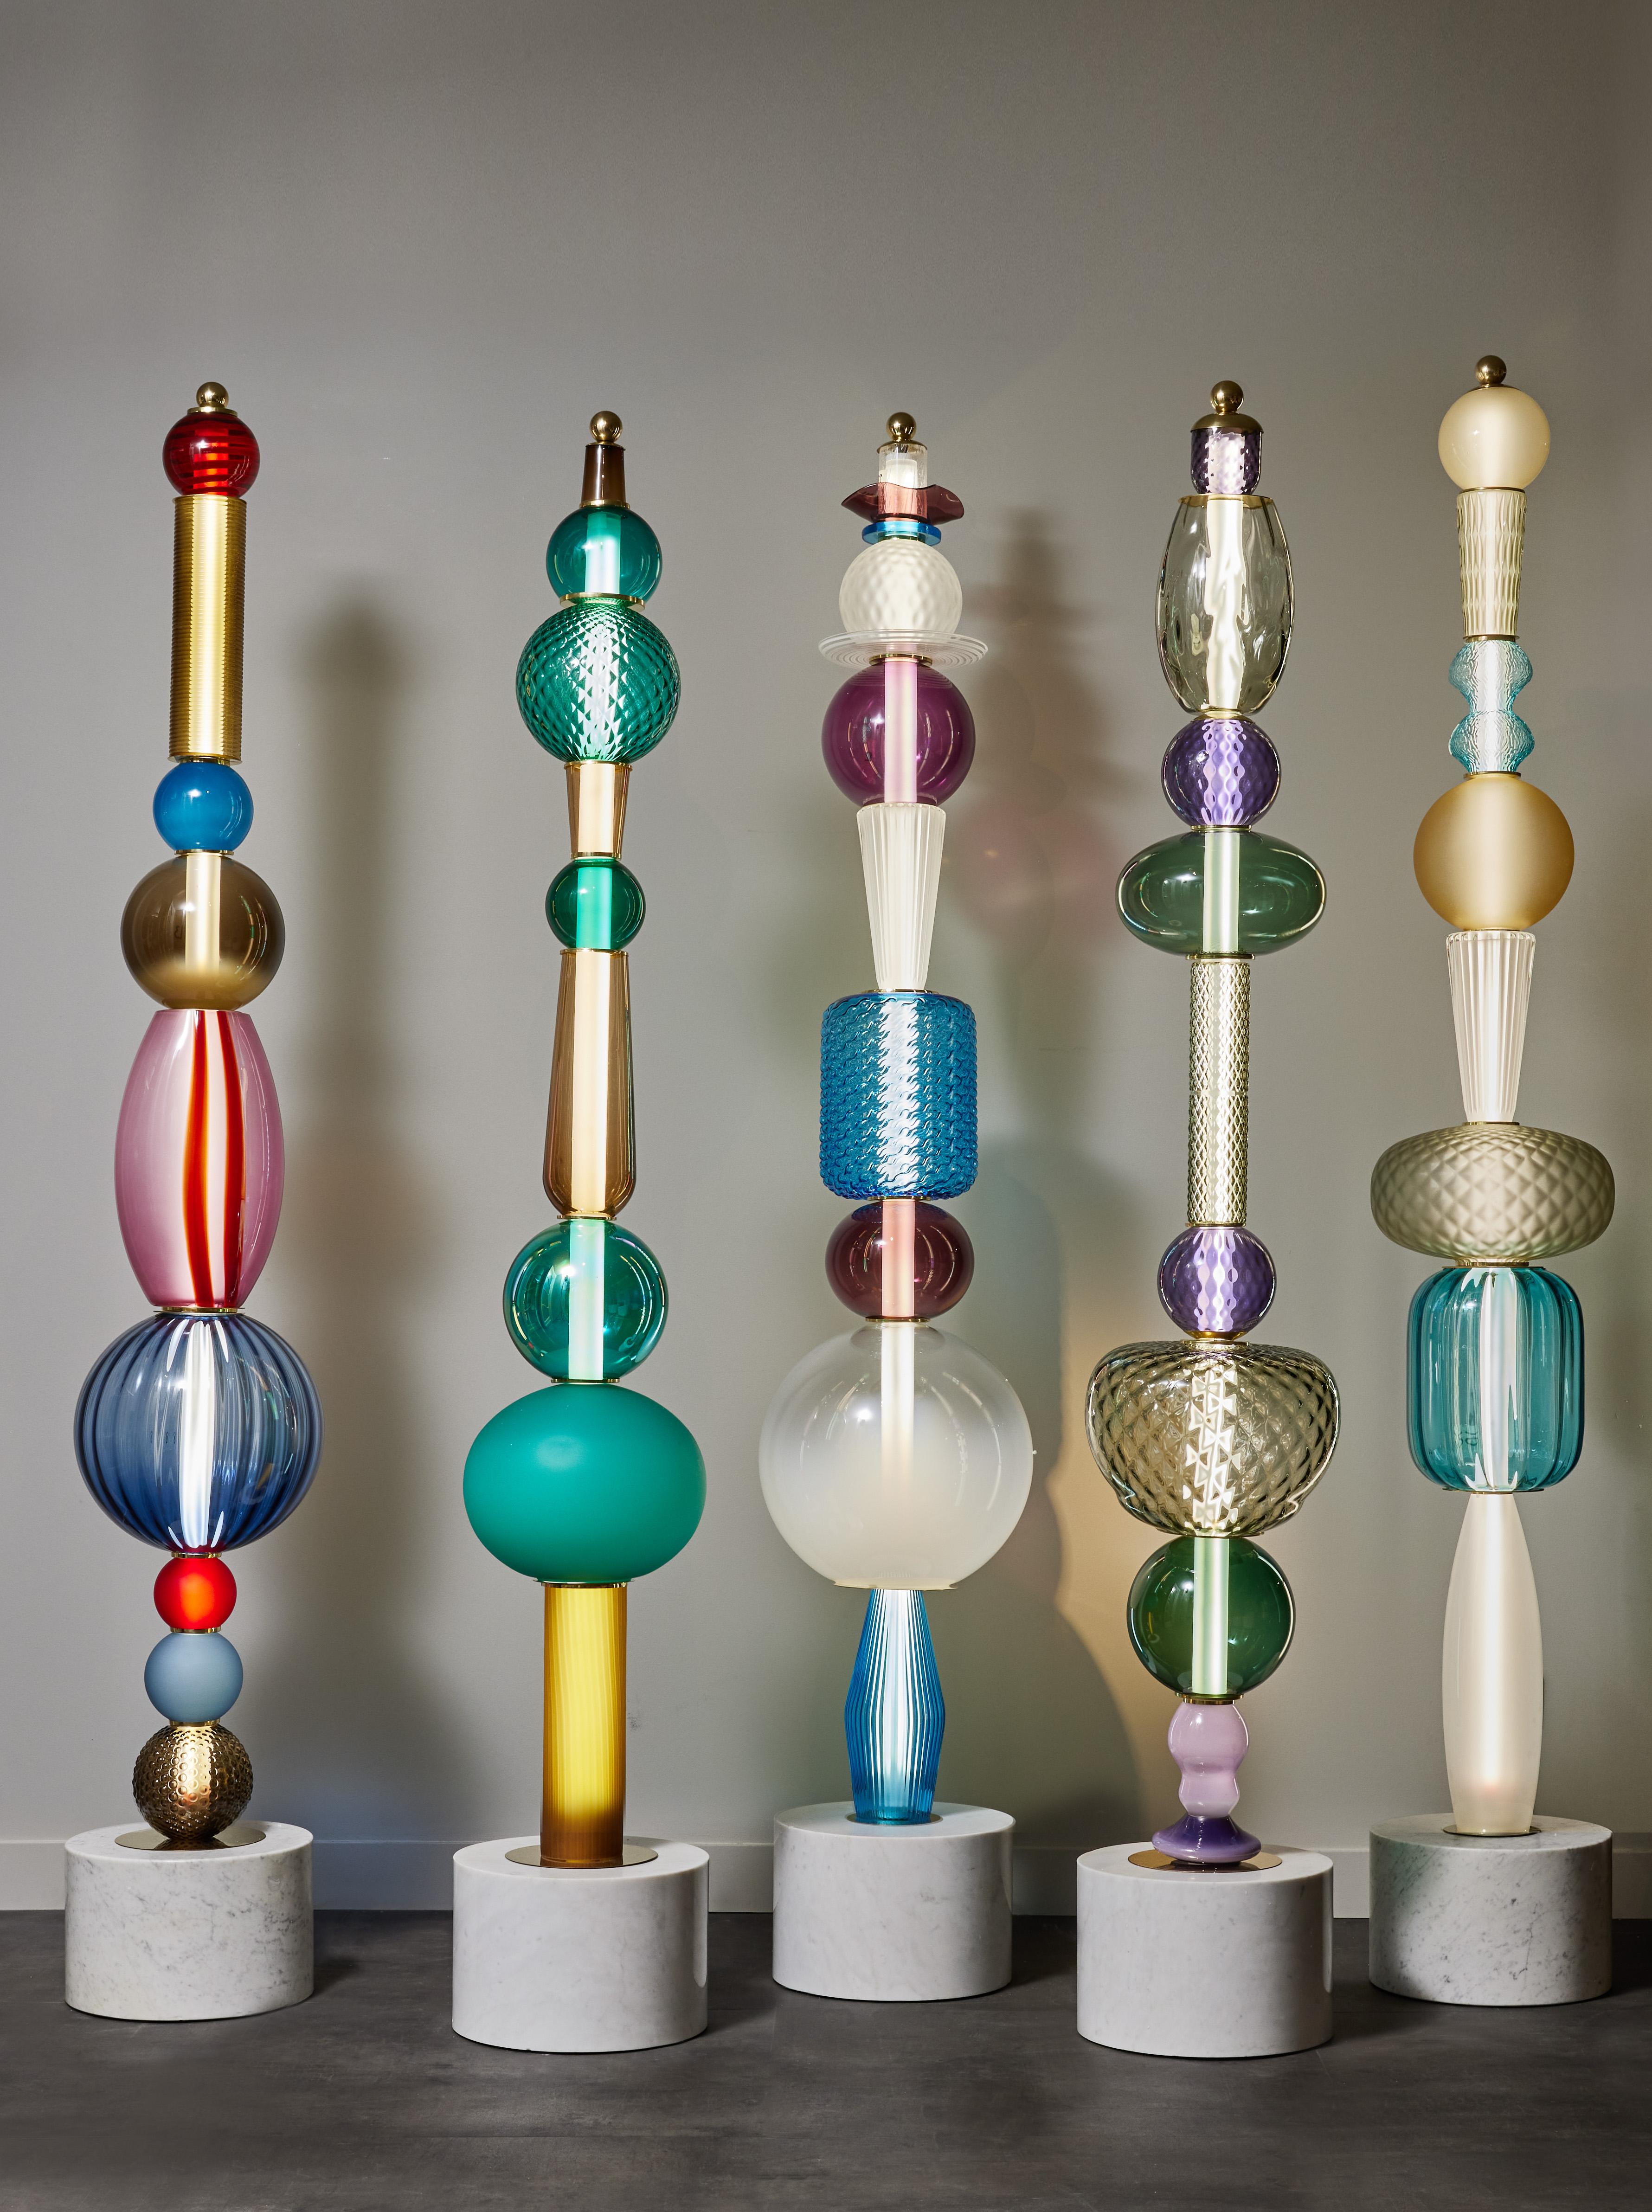 Built like totems, we used a Carrara marble base then stacked different Murano glass parts in various colors and shapes, alternating with some brass discreet elements.

Sold separately, price displayed for one floor lamp.